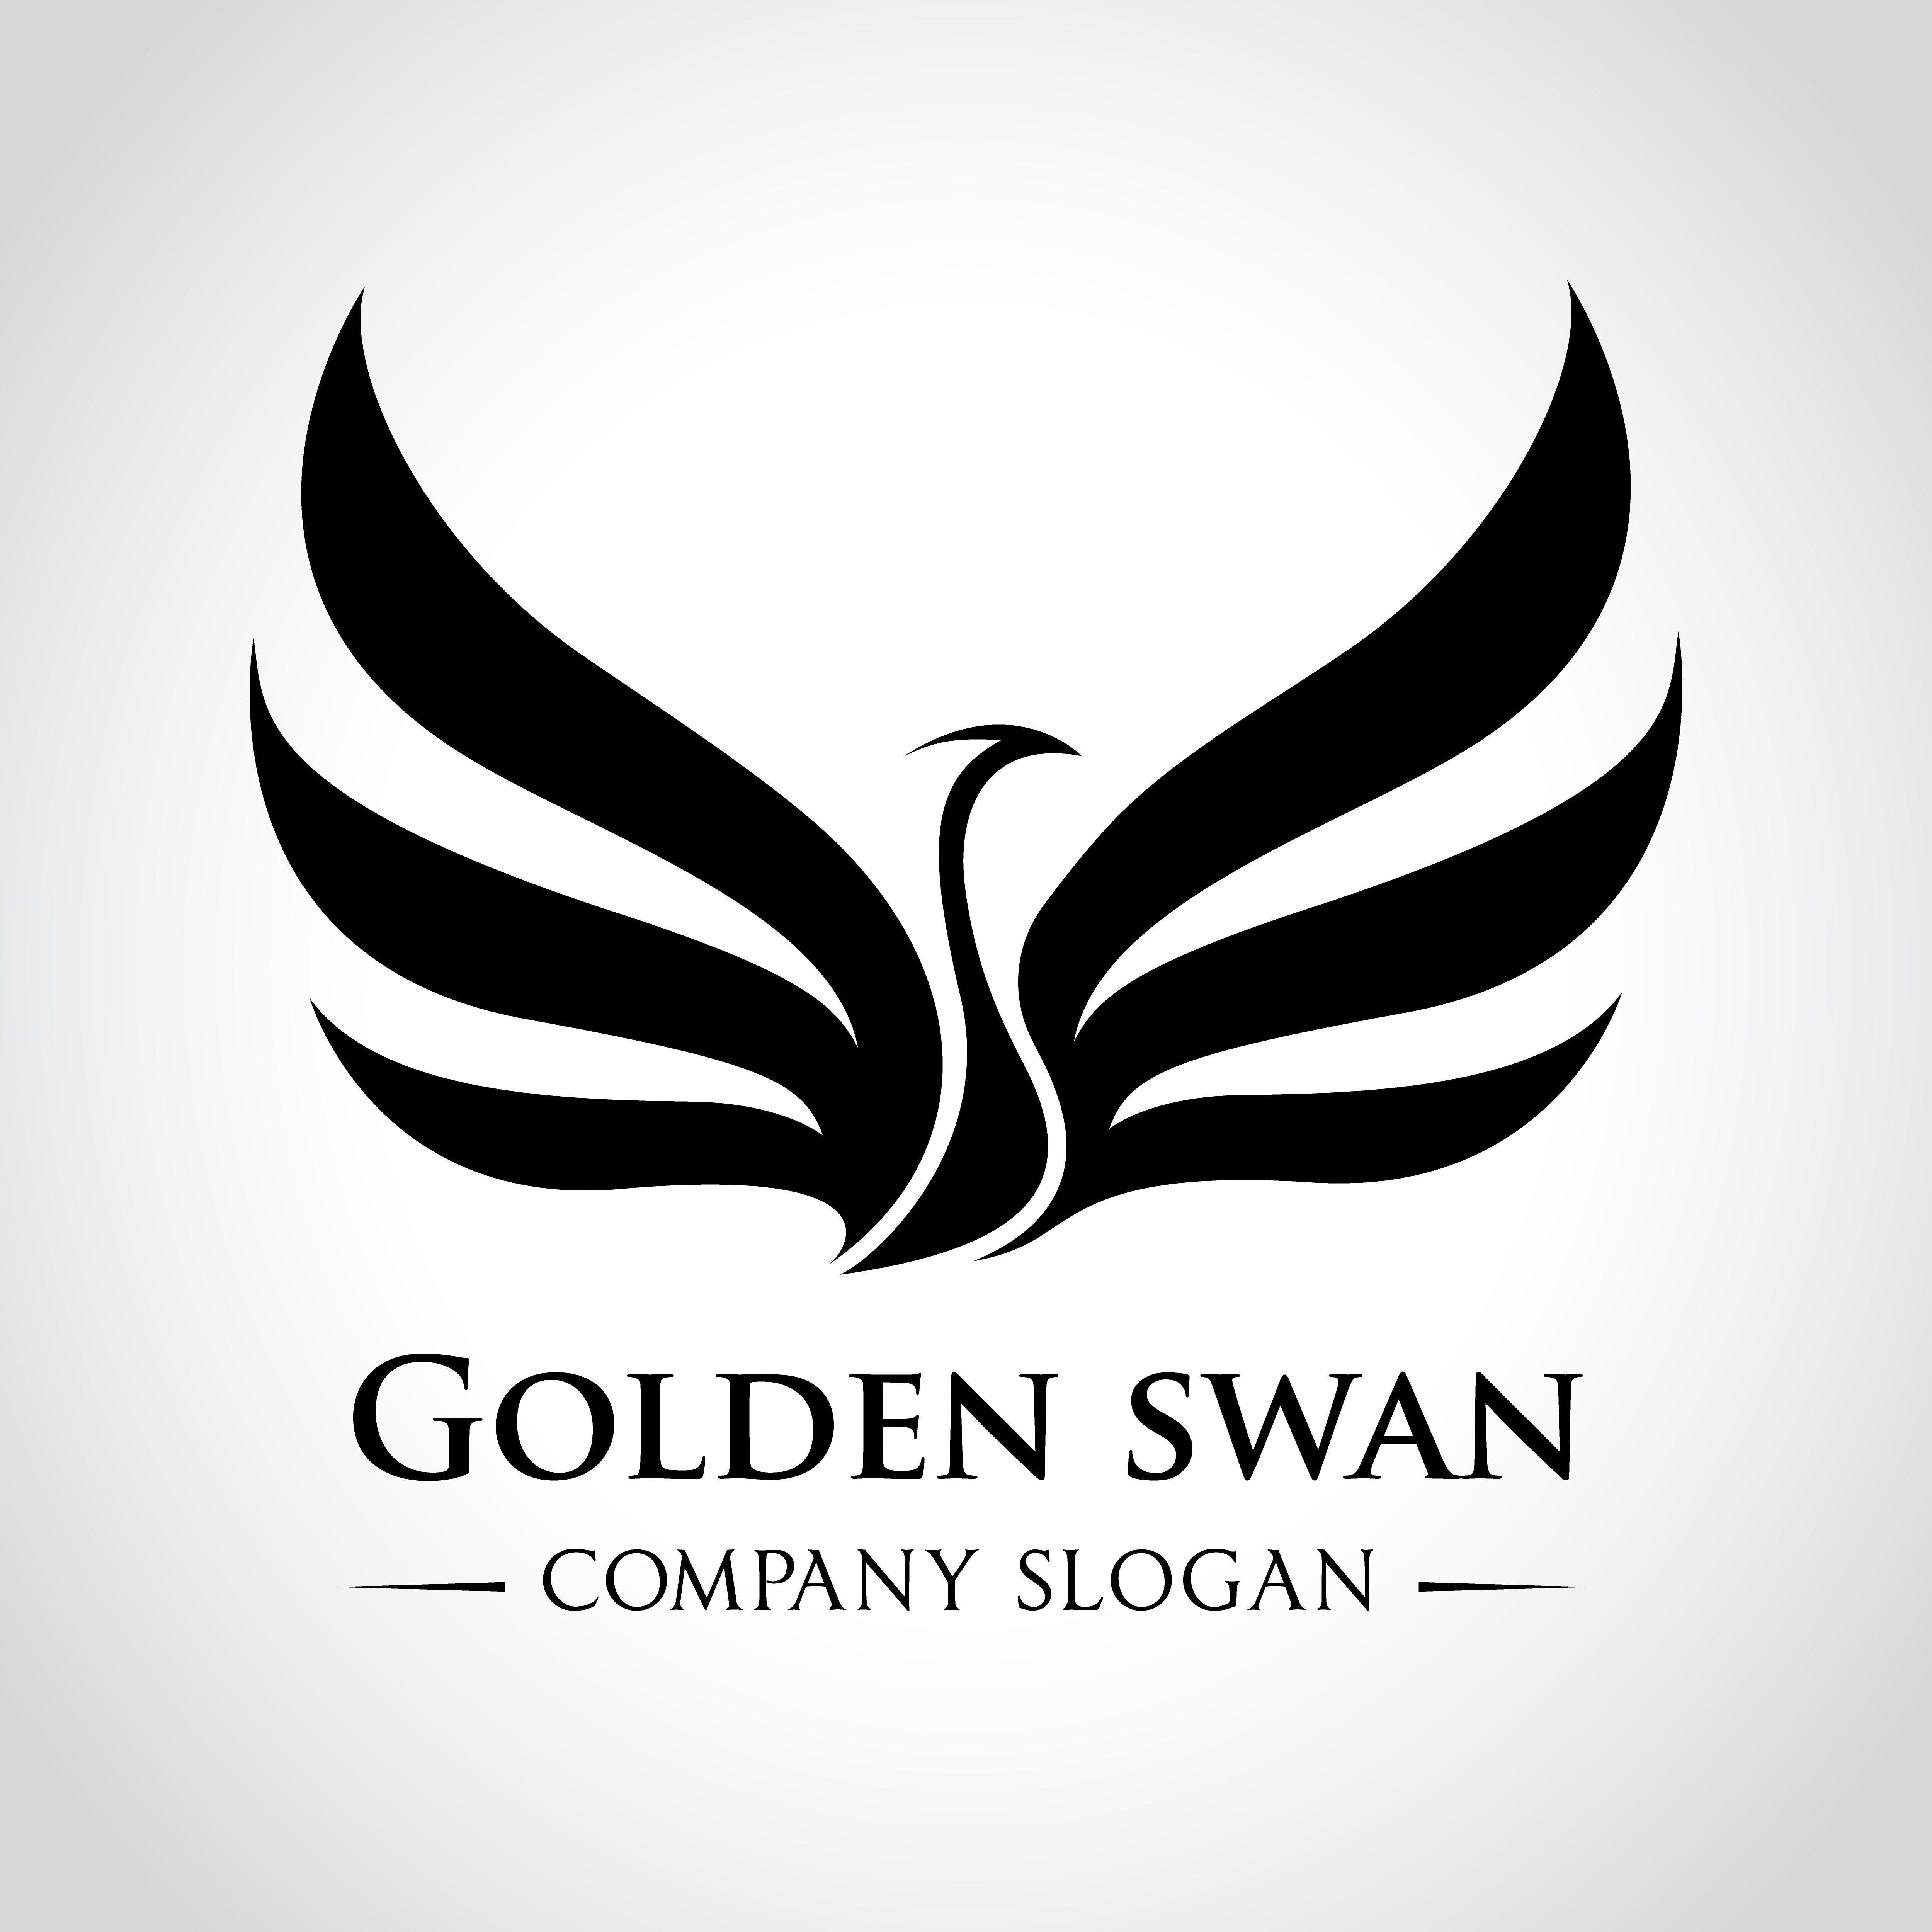 White Swan Company Logo - Definitive Guide to Designing a Logo